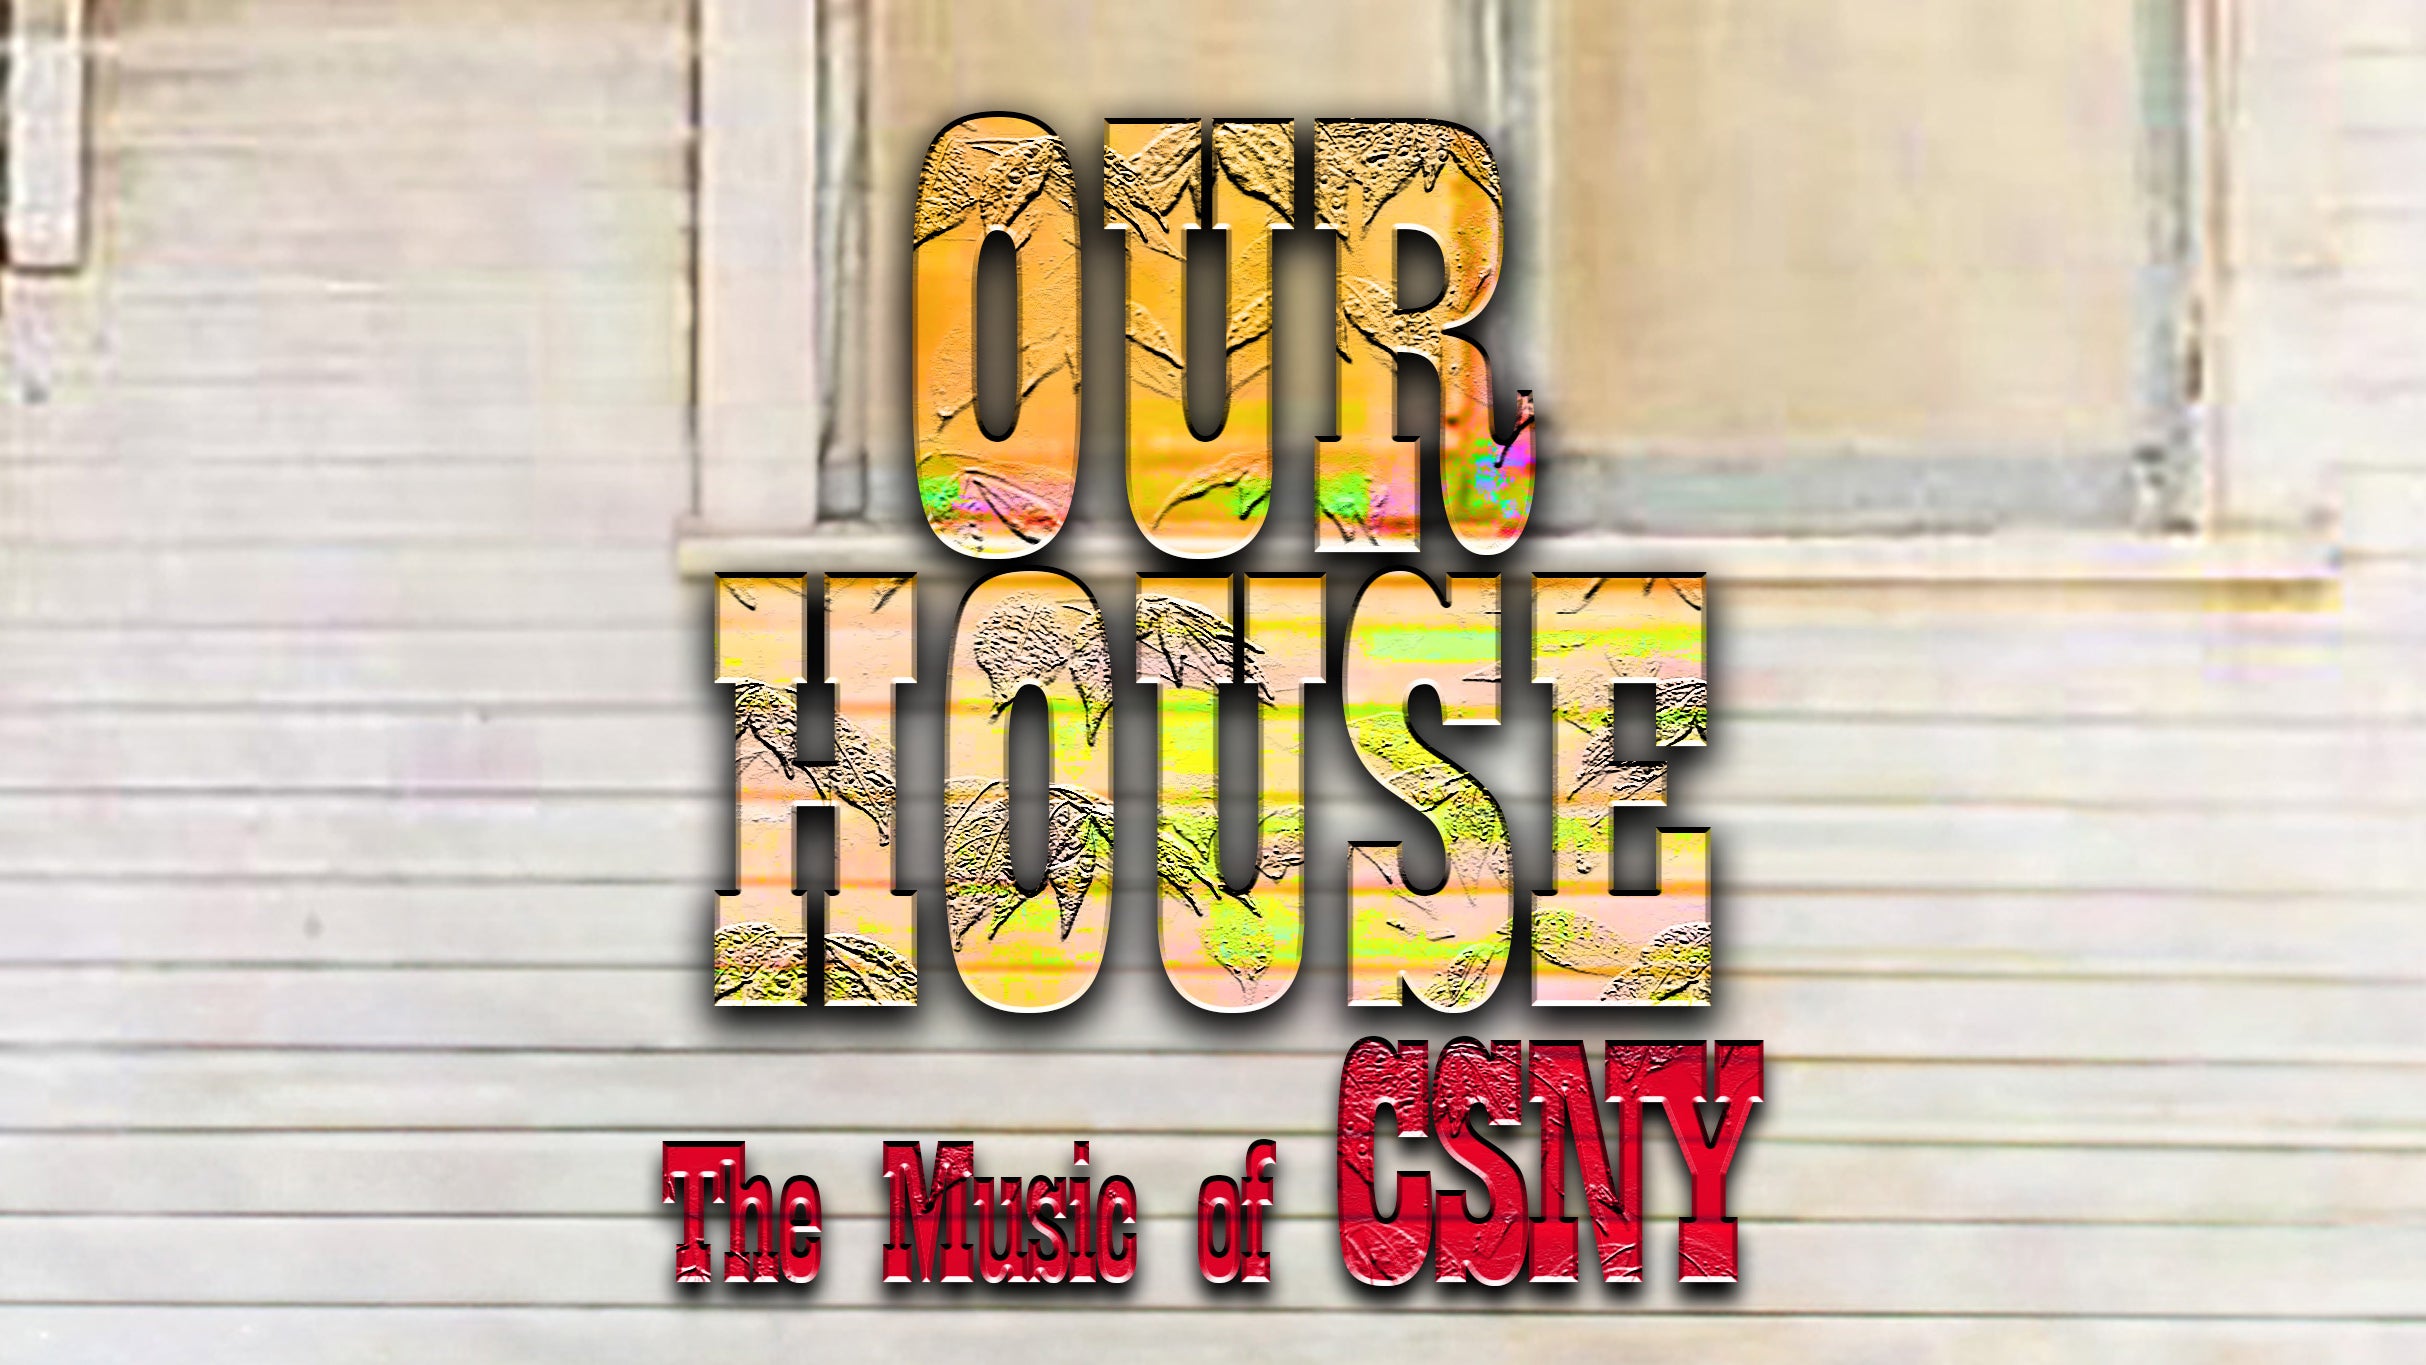 Our House: The Music Of Crosby, Stills, Nash & Young in Bethel promo photo for Live Nation presale offer code